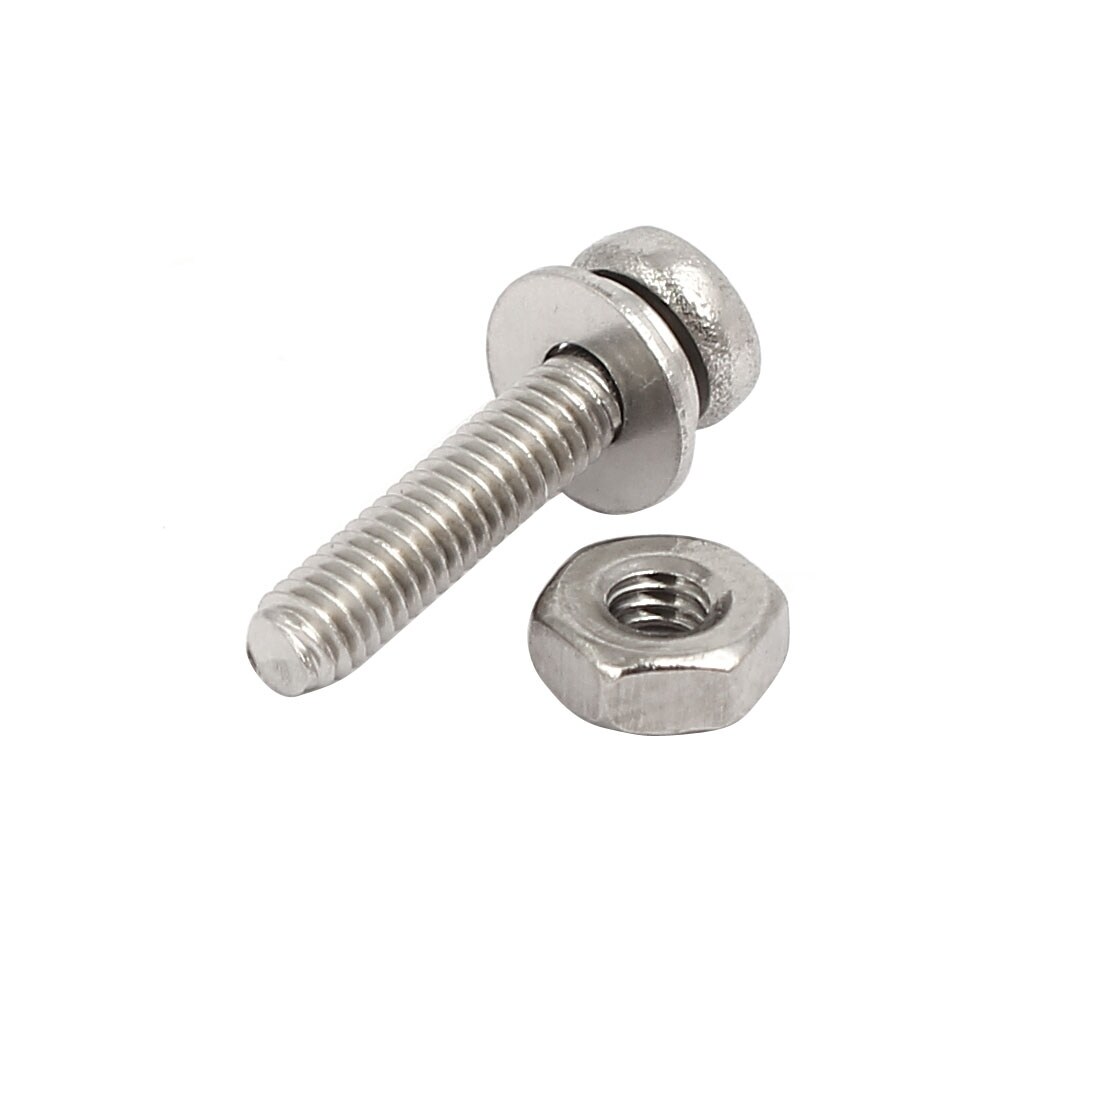 Details about   Genuine Generic Phillips Pan Head Screw with Washers 4x10mm BZP 31305-04010-65